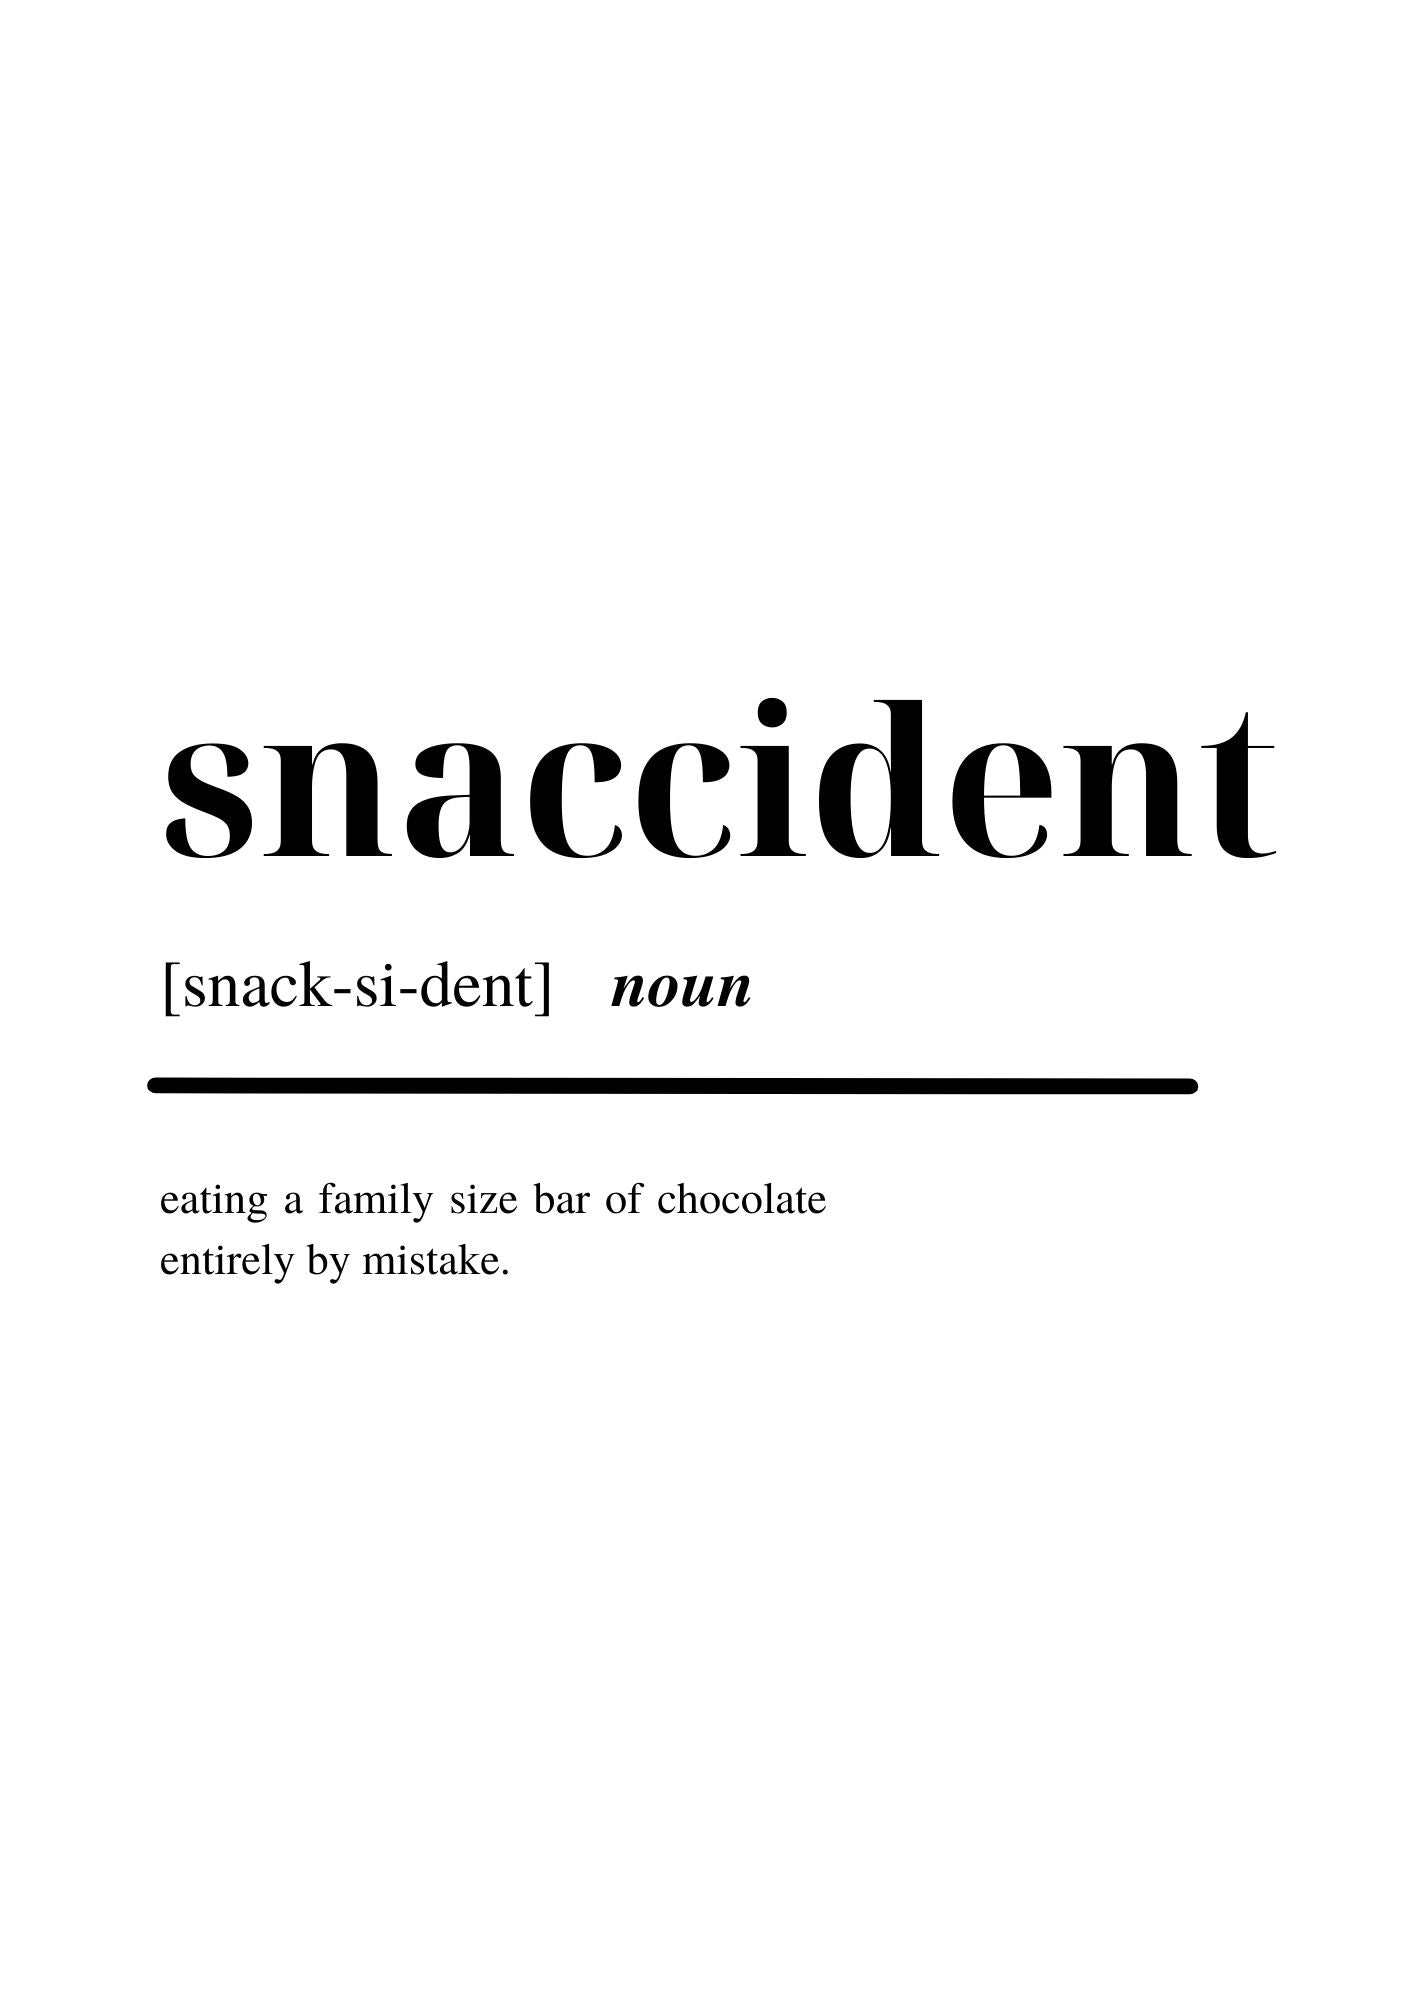 Snaccident poster